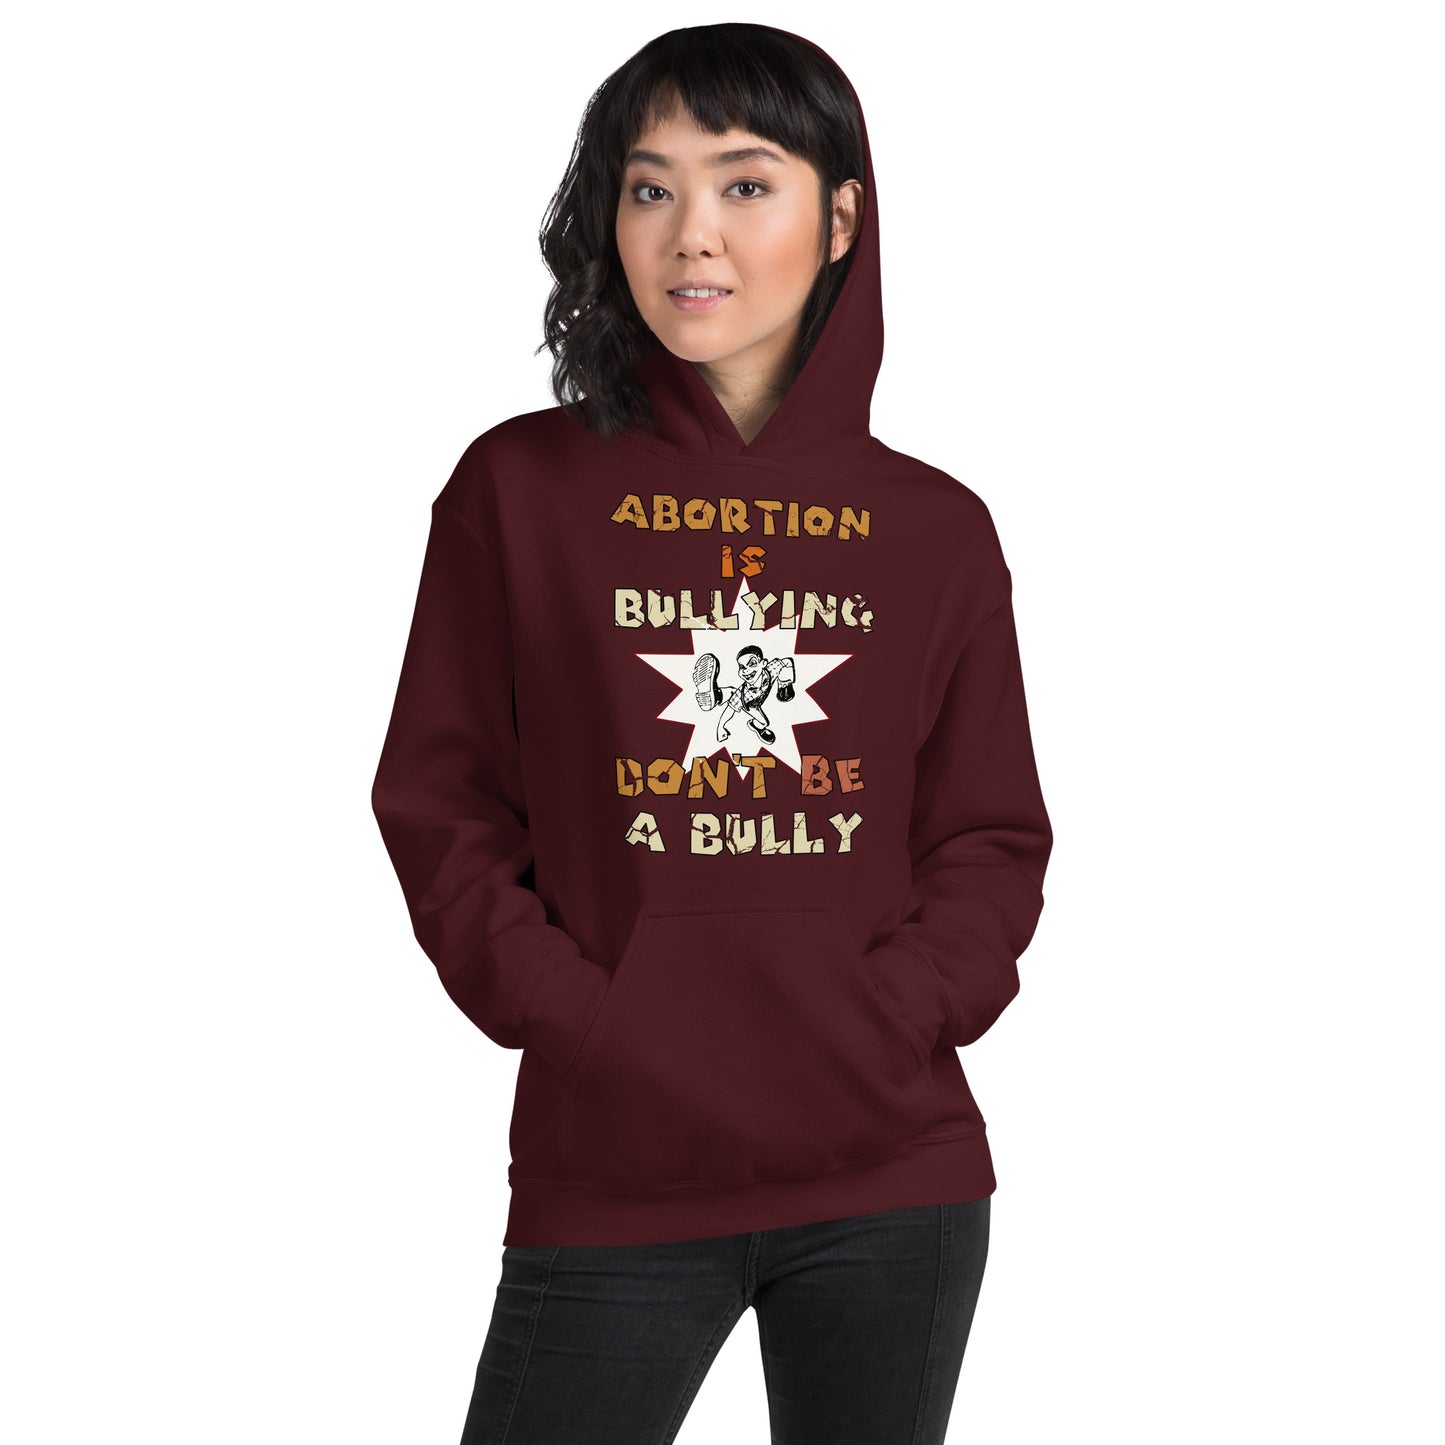 A001 Hoodie – Gildan 18500 Unisex Hoodie Featuring Mean Guy Graphic with text “Abortion is Bullying. Don’t be a Bully.”